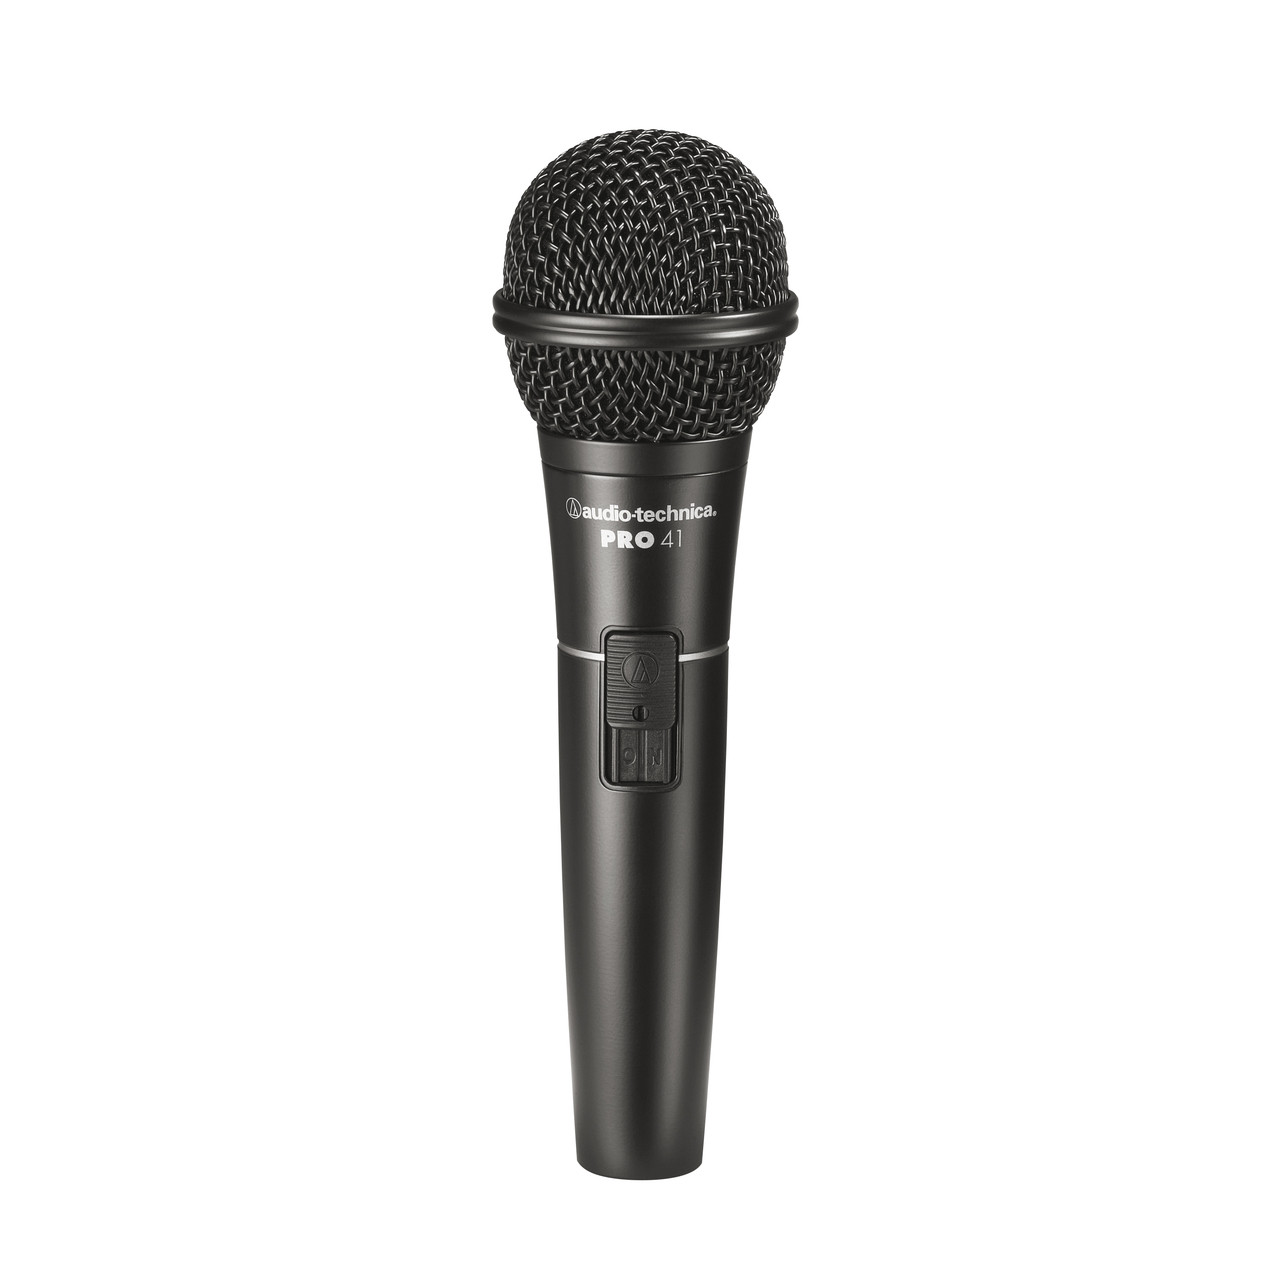 Audio-Technica PRO 41 Dynamic Cable Vocal Microphone